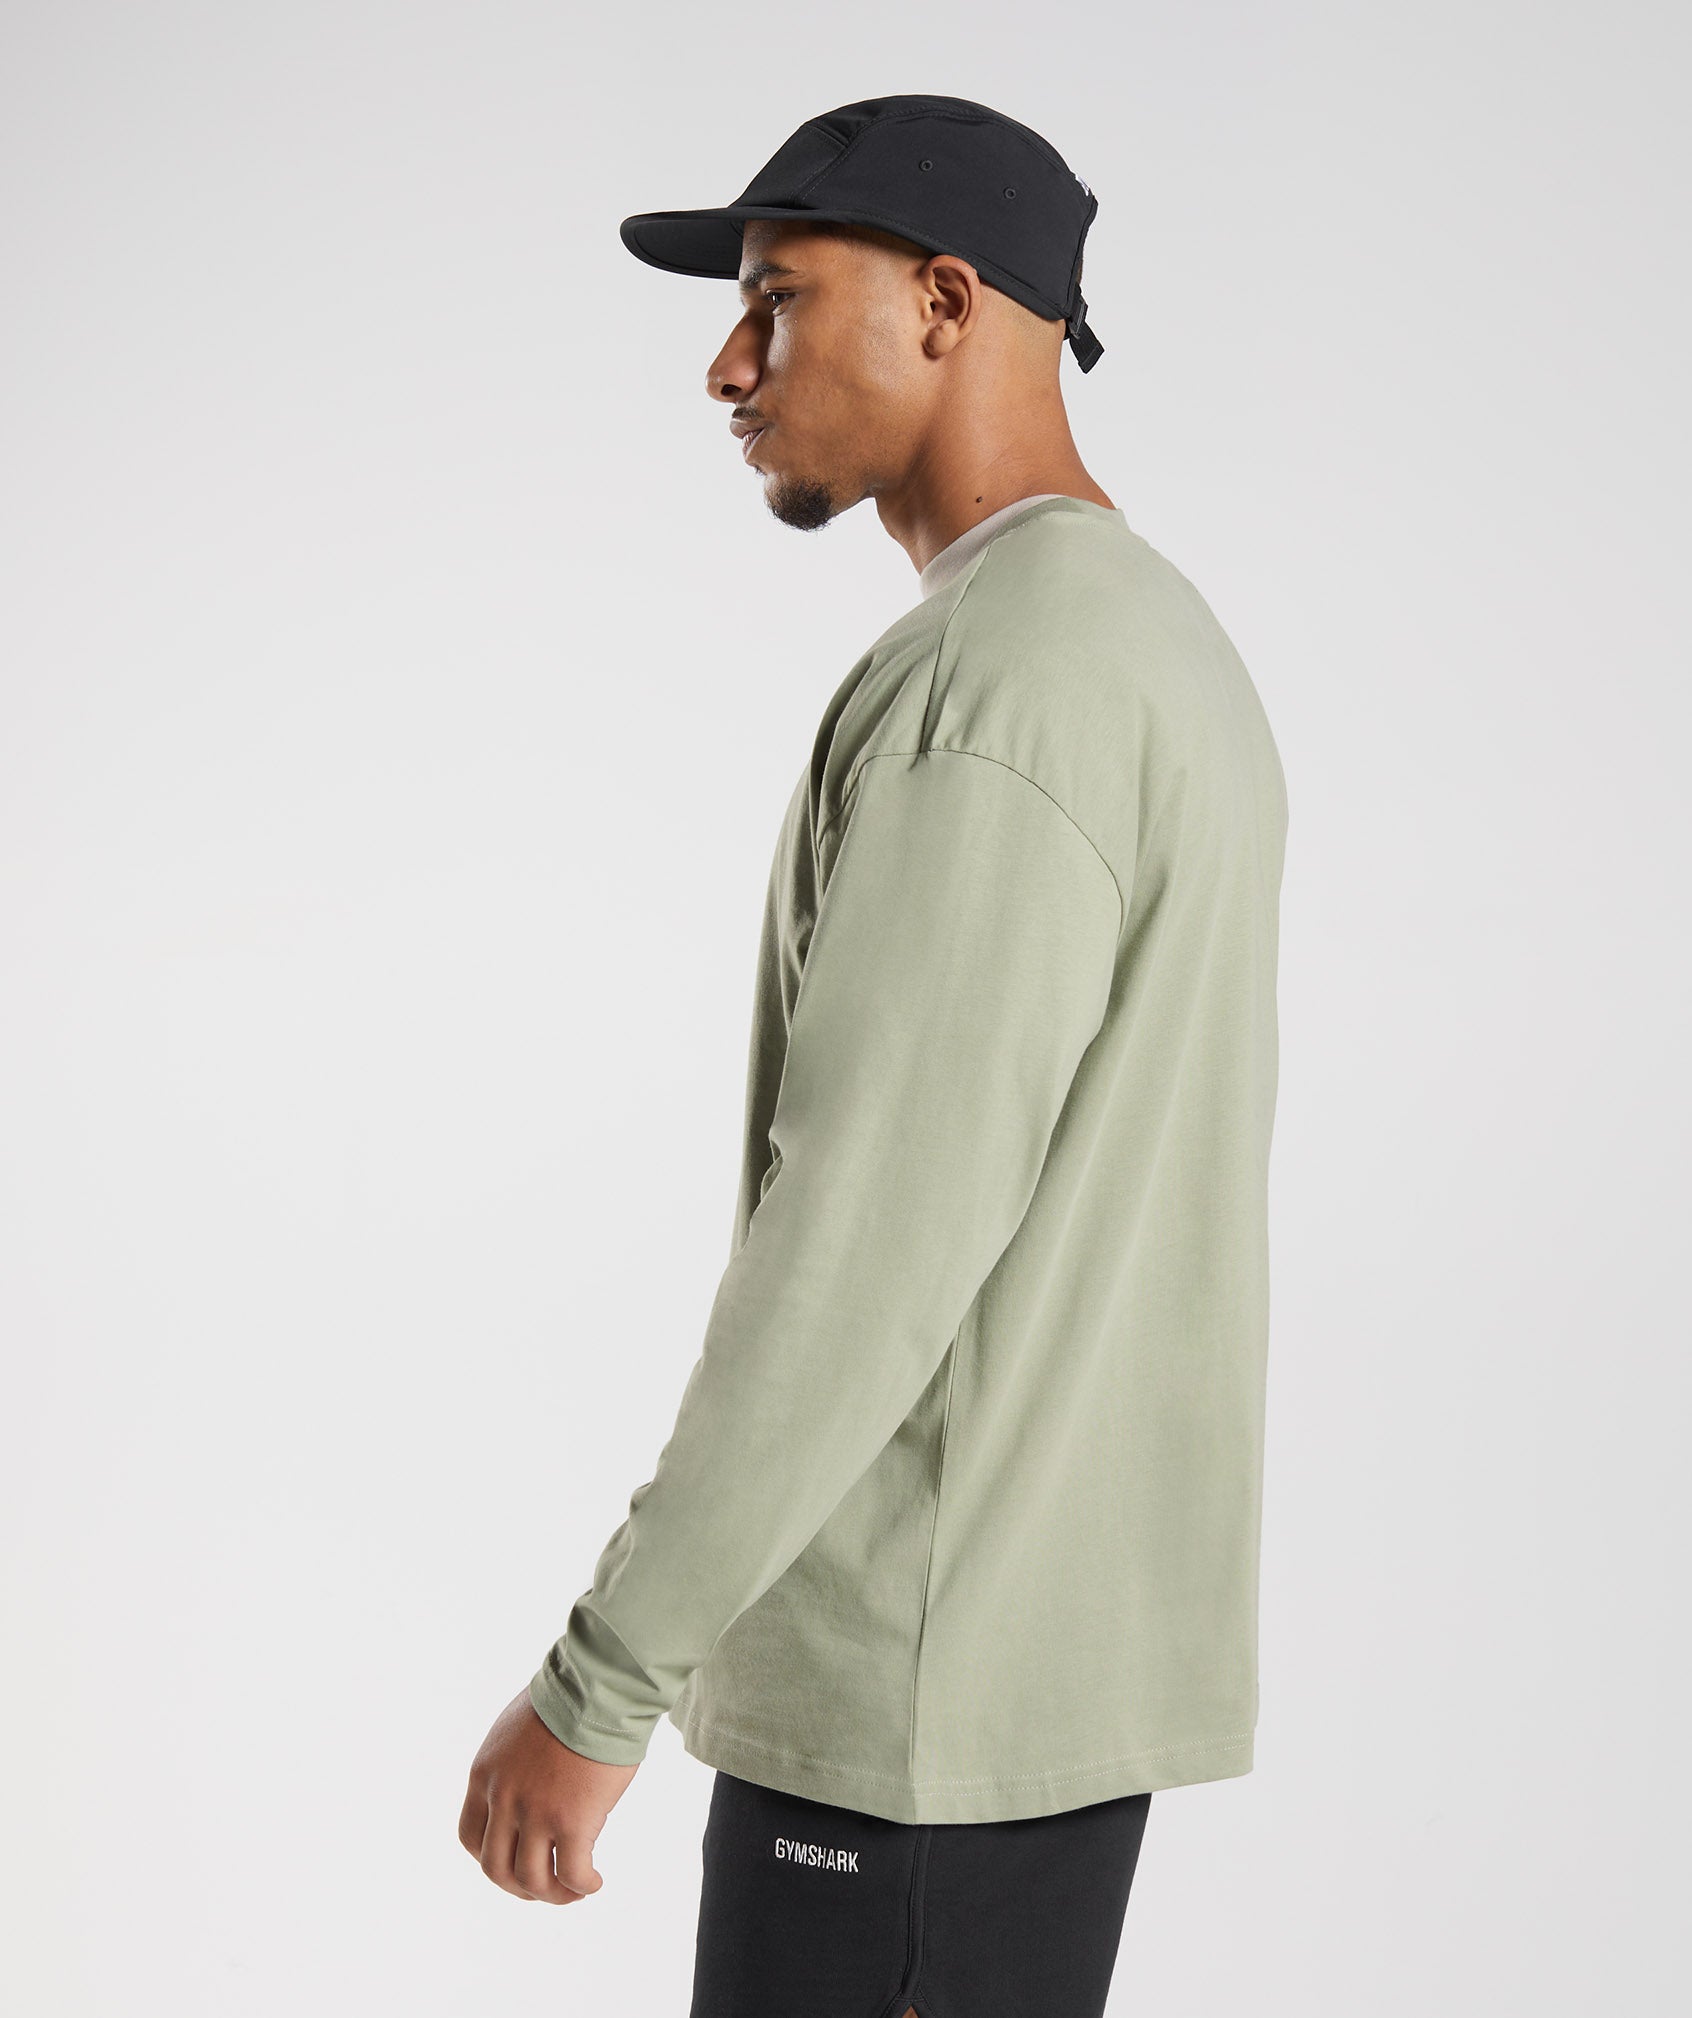 Rest Day Sweats Long Sleeve T-Shirt in Sage Green - view 4